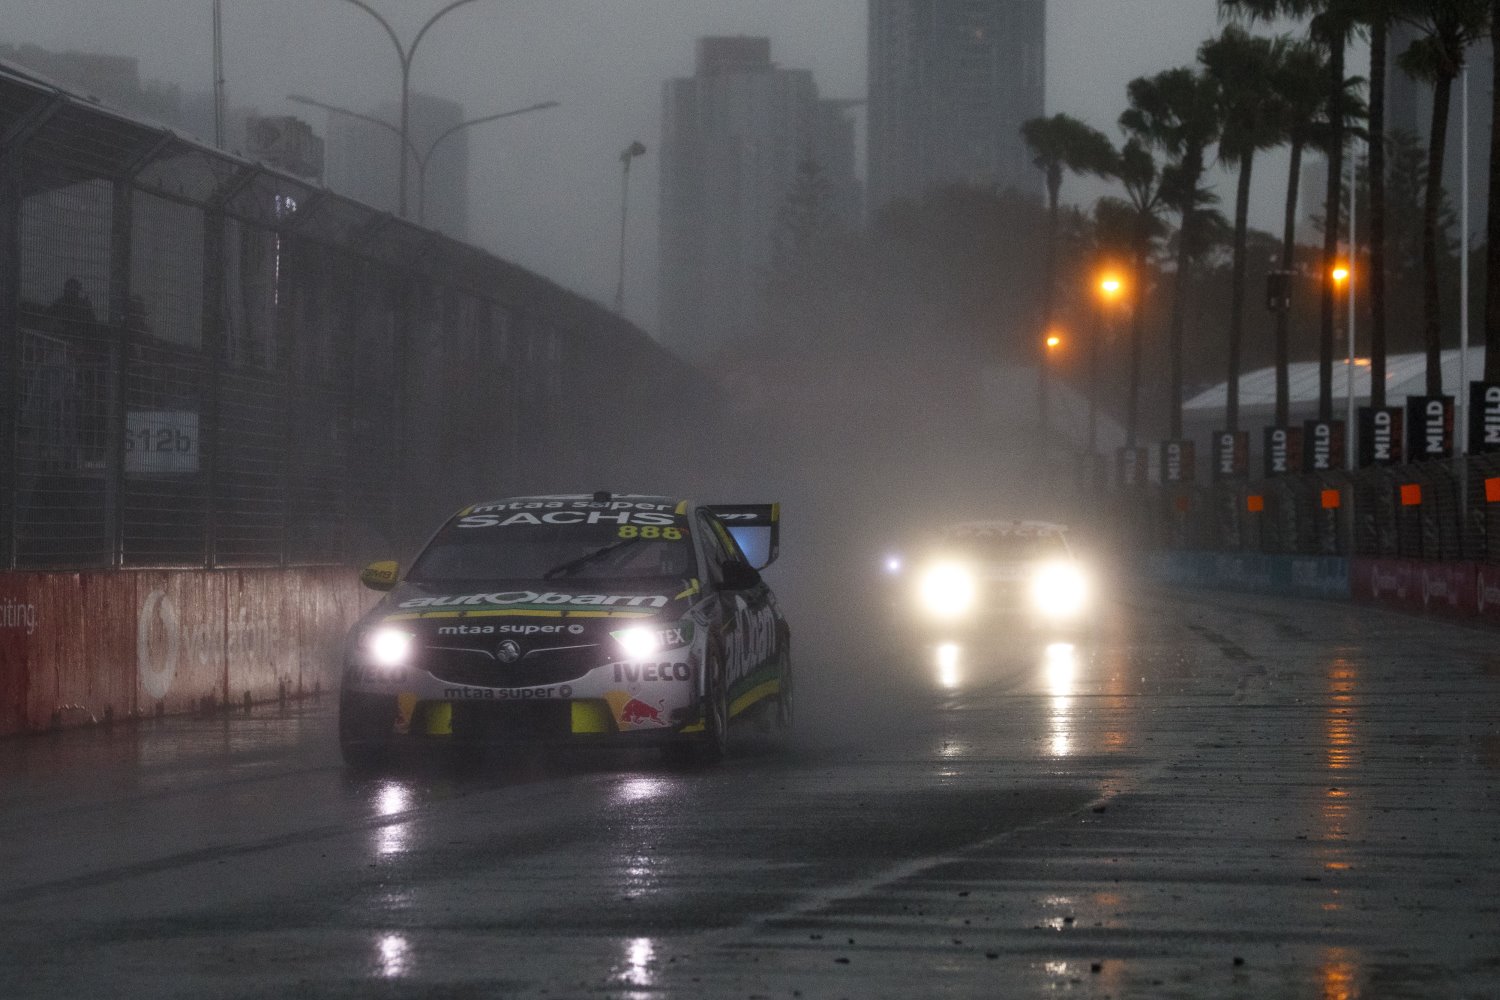 Heavy rain forced the race to be red-flagged and eventually stopped